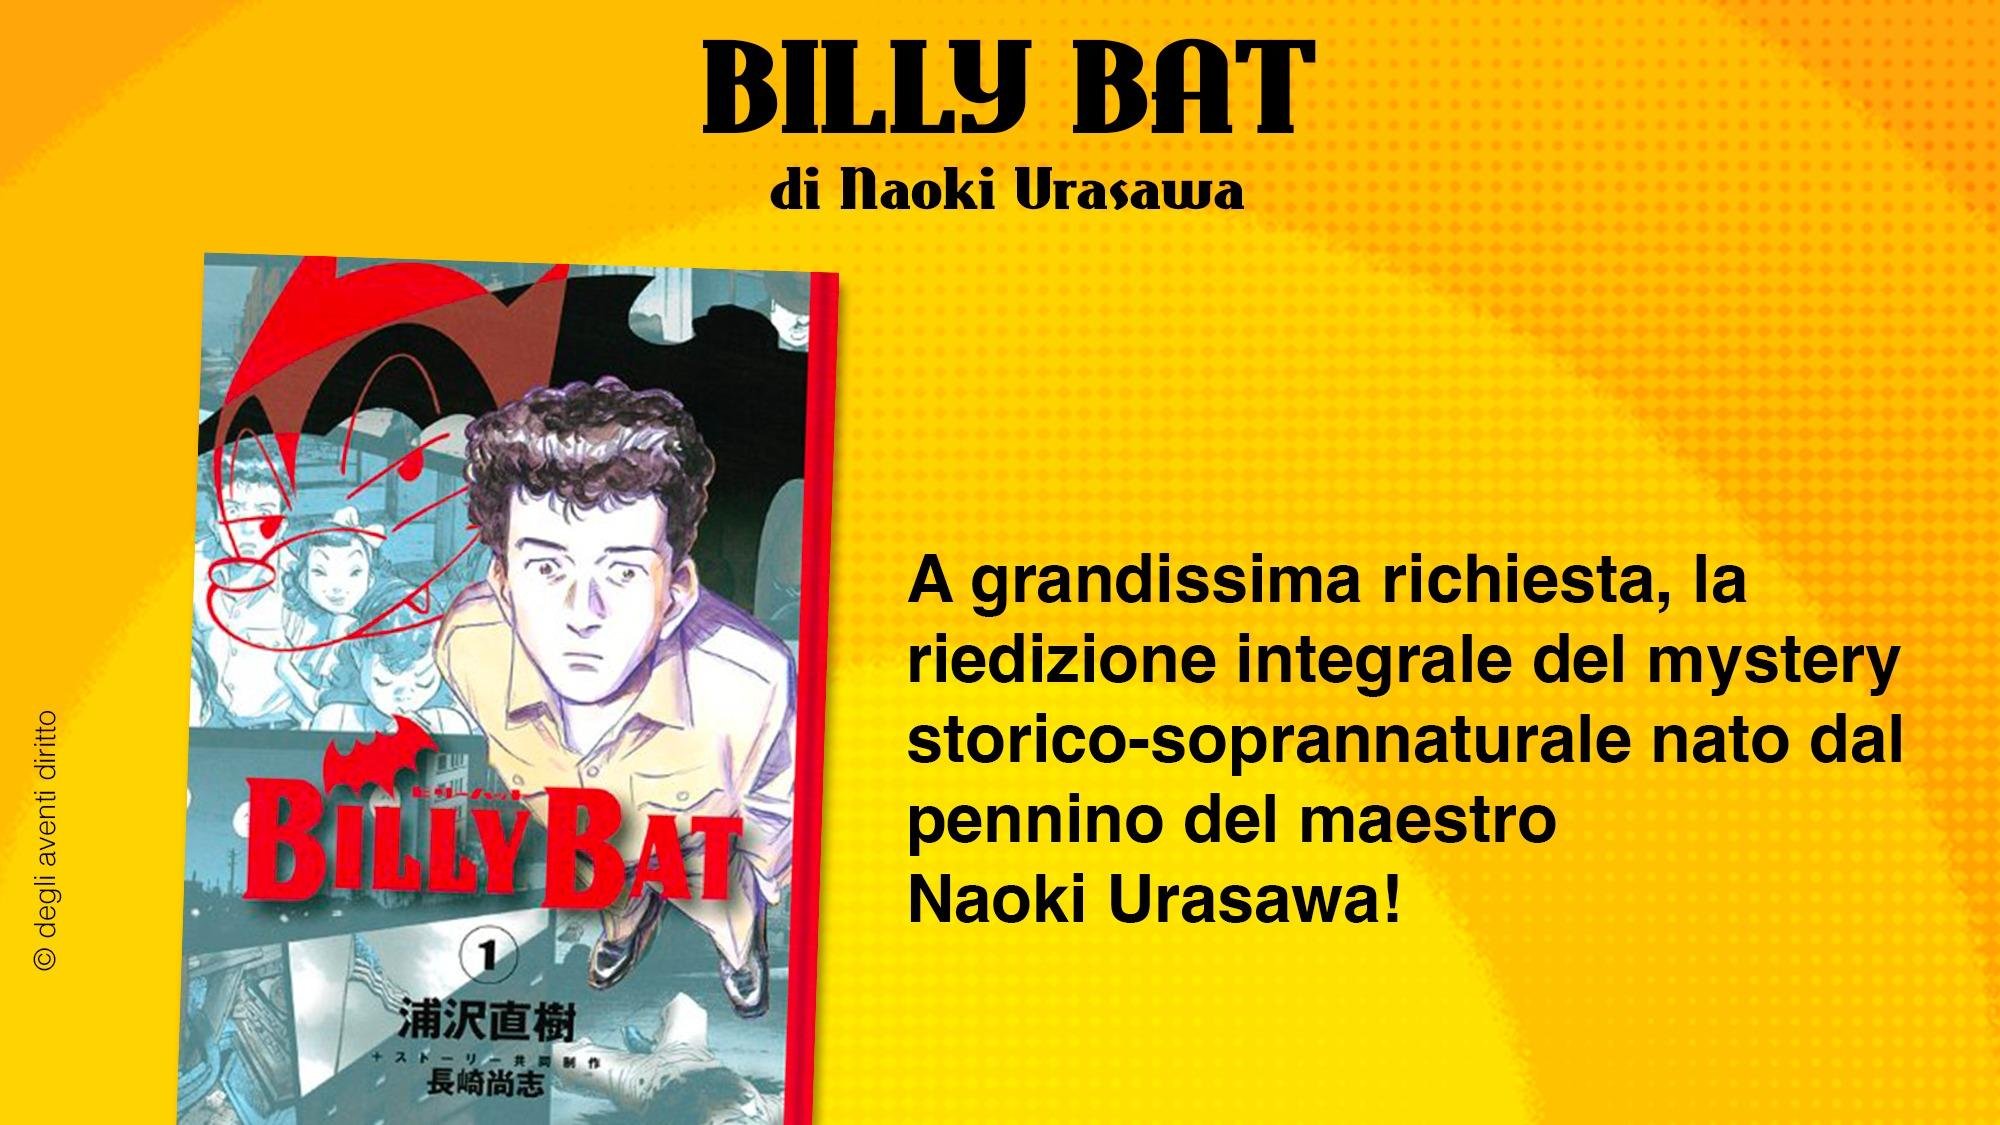 Art] Some prominent historical figures that appear in this manga (Billy Bat)  : r/manga